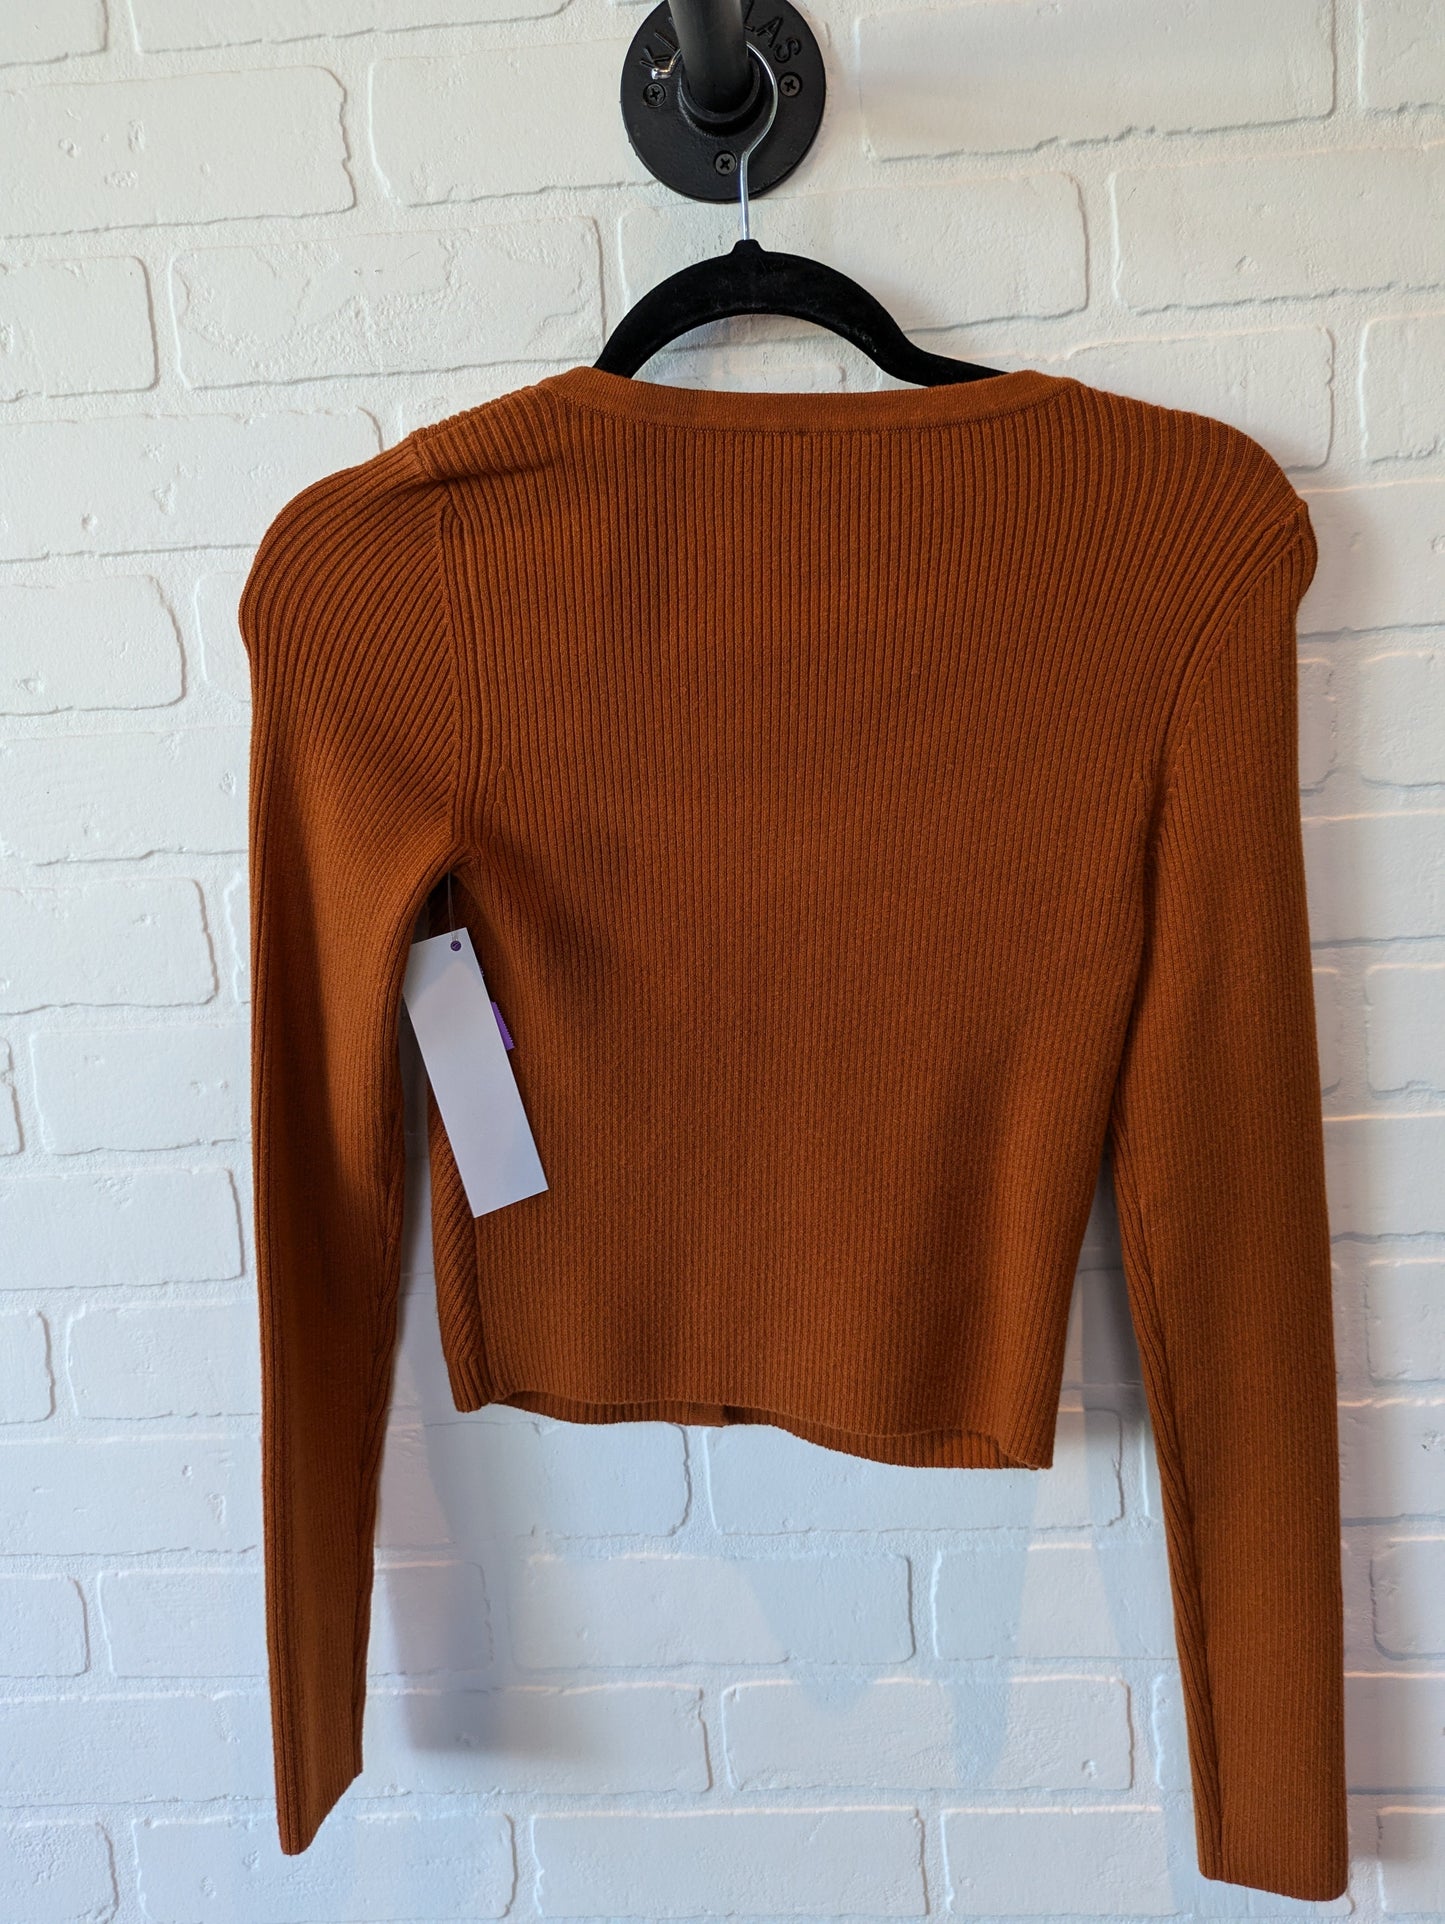 Orange Sweater Abercrombie And Fitch, Size Xs